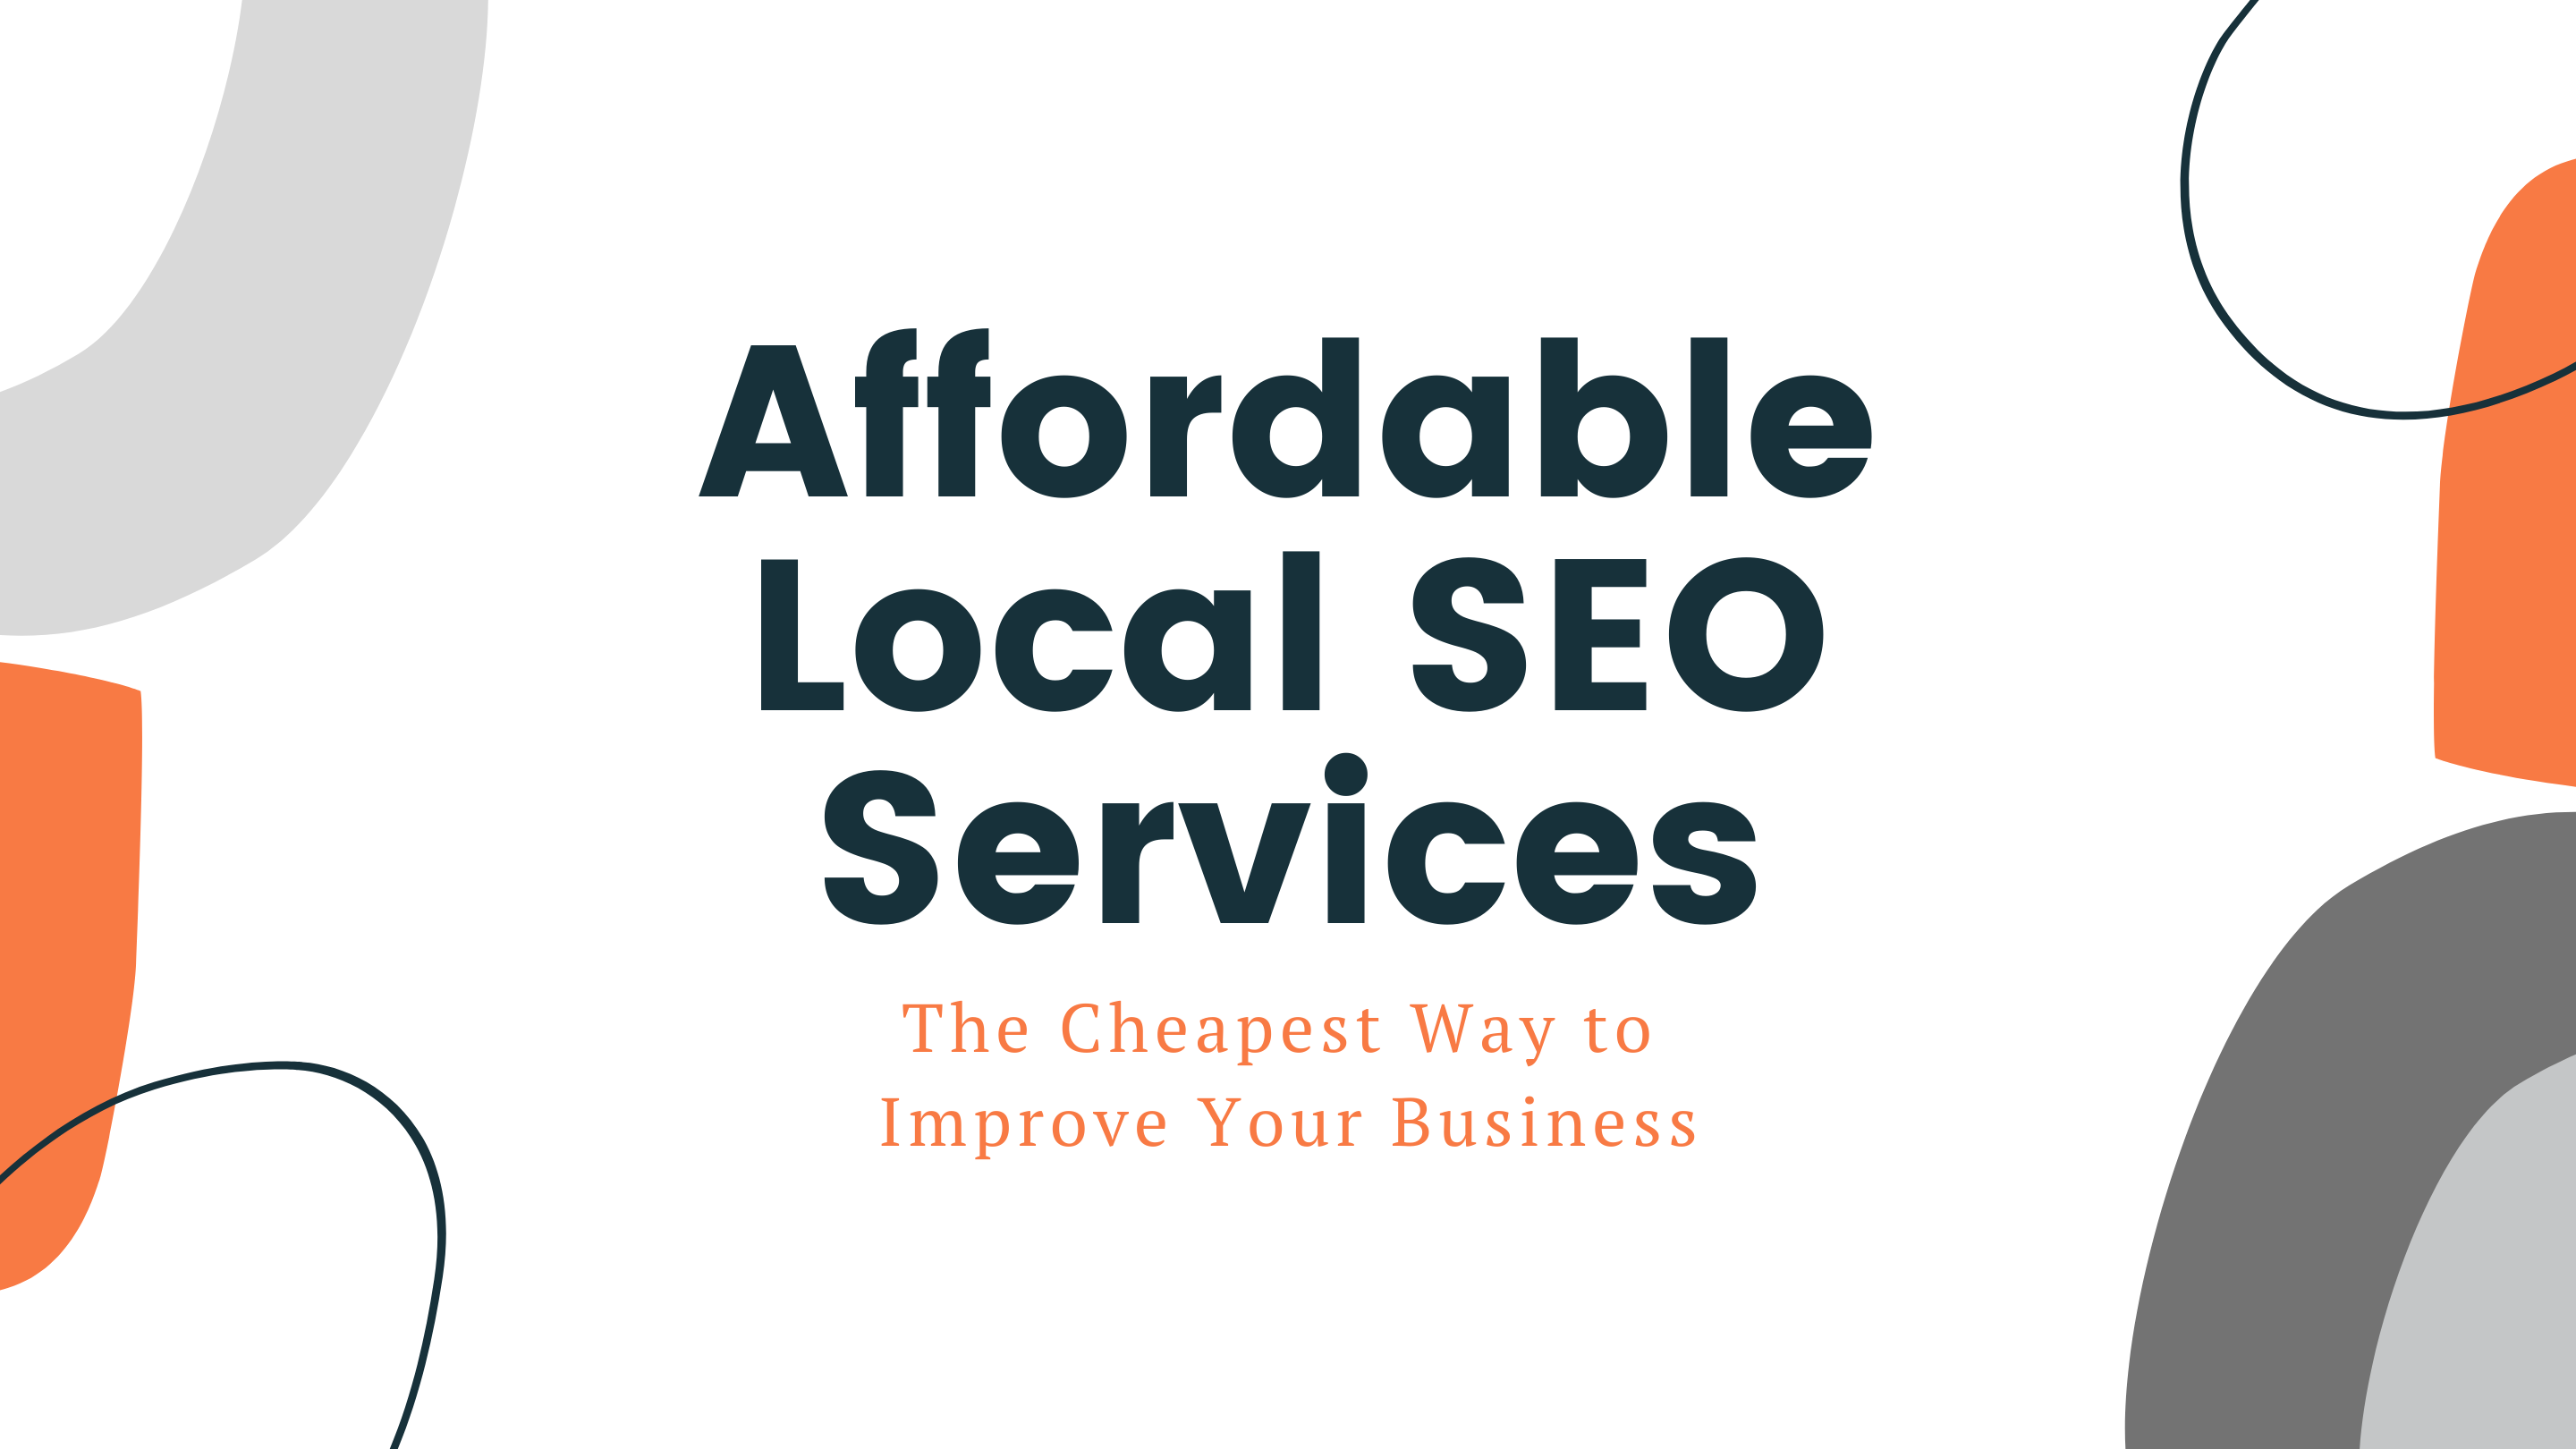 affordable local seo services - the cheapest way to improve your business _ Agency Jet